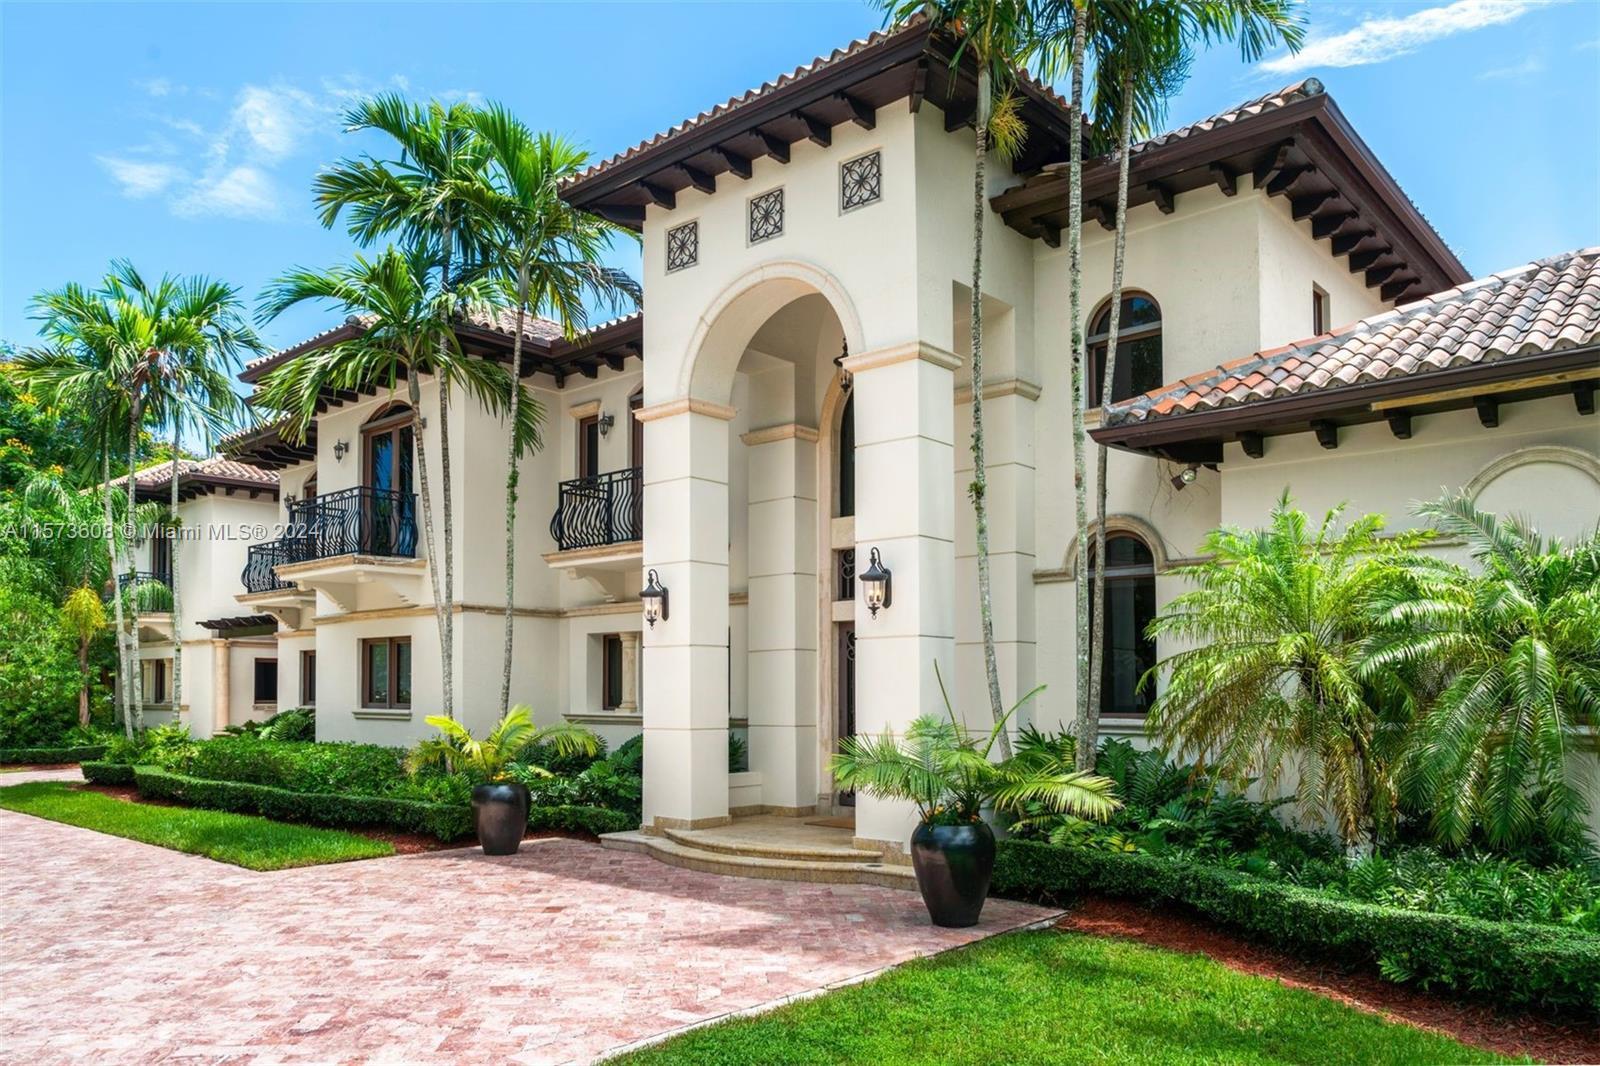 This attractive 9,267 sf Pinecrest residence with 6 bedrooms and 7.5 baths presents a rare blend of 